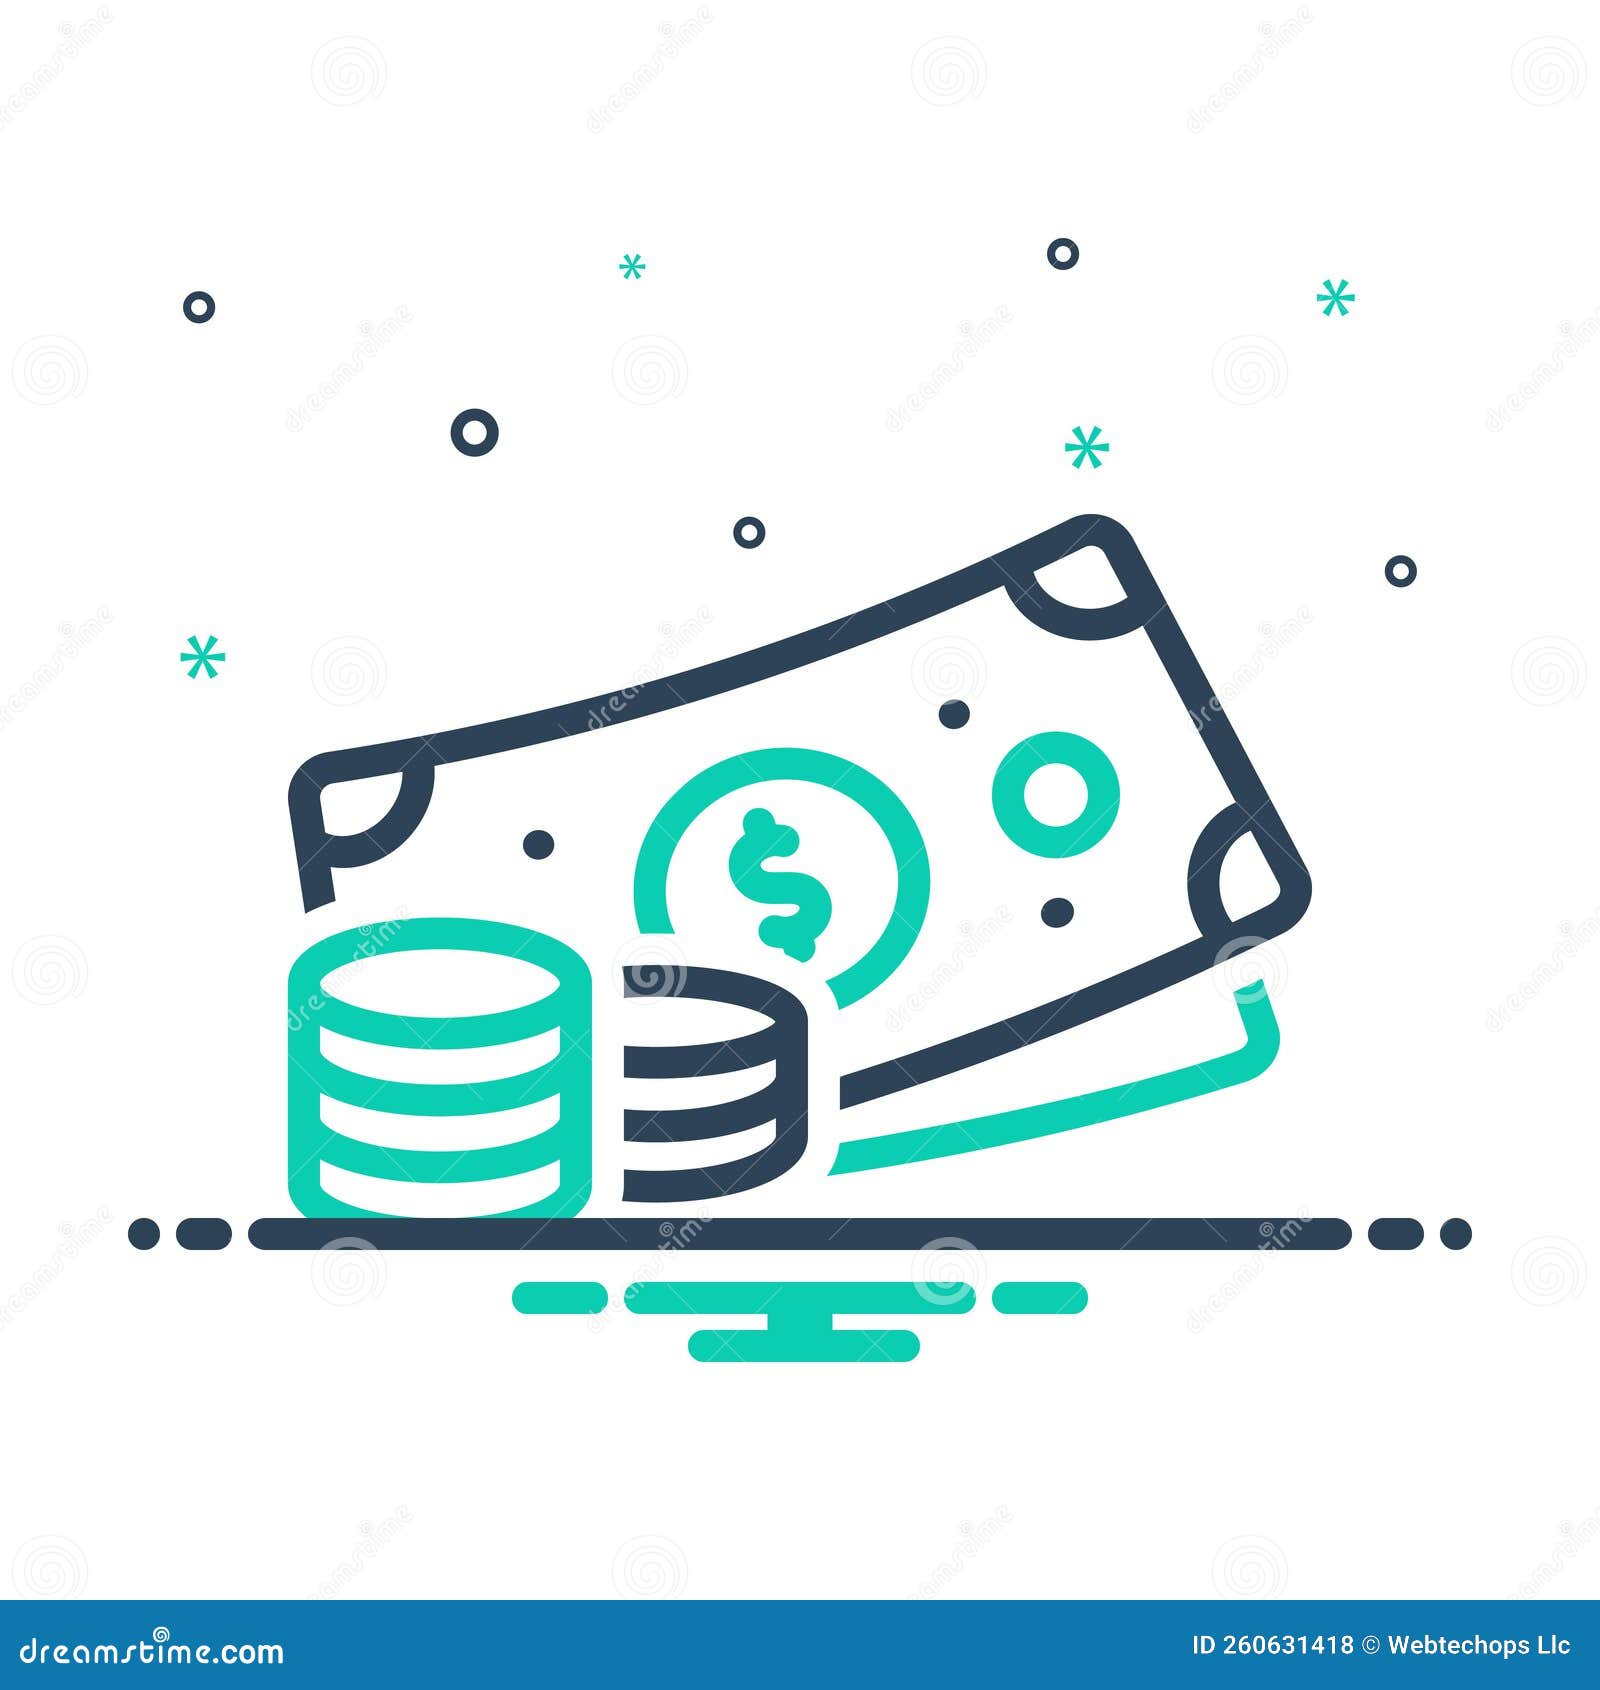 mix icon for monetary, pecuniary and fiscal